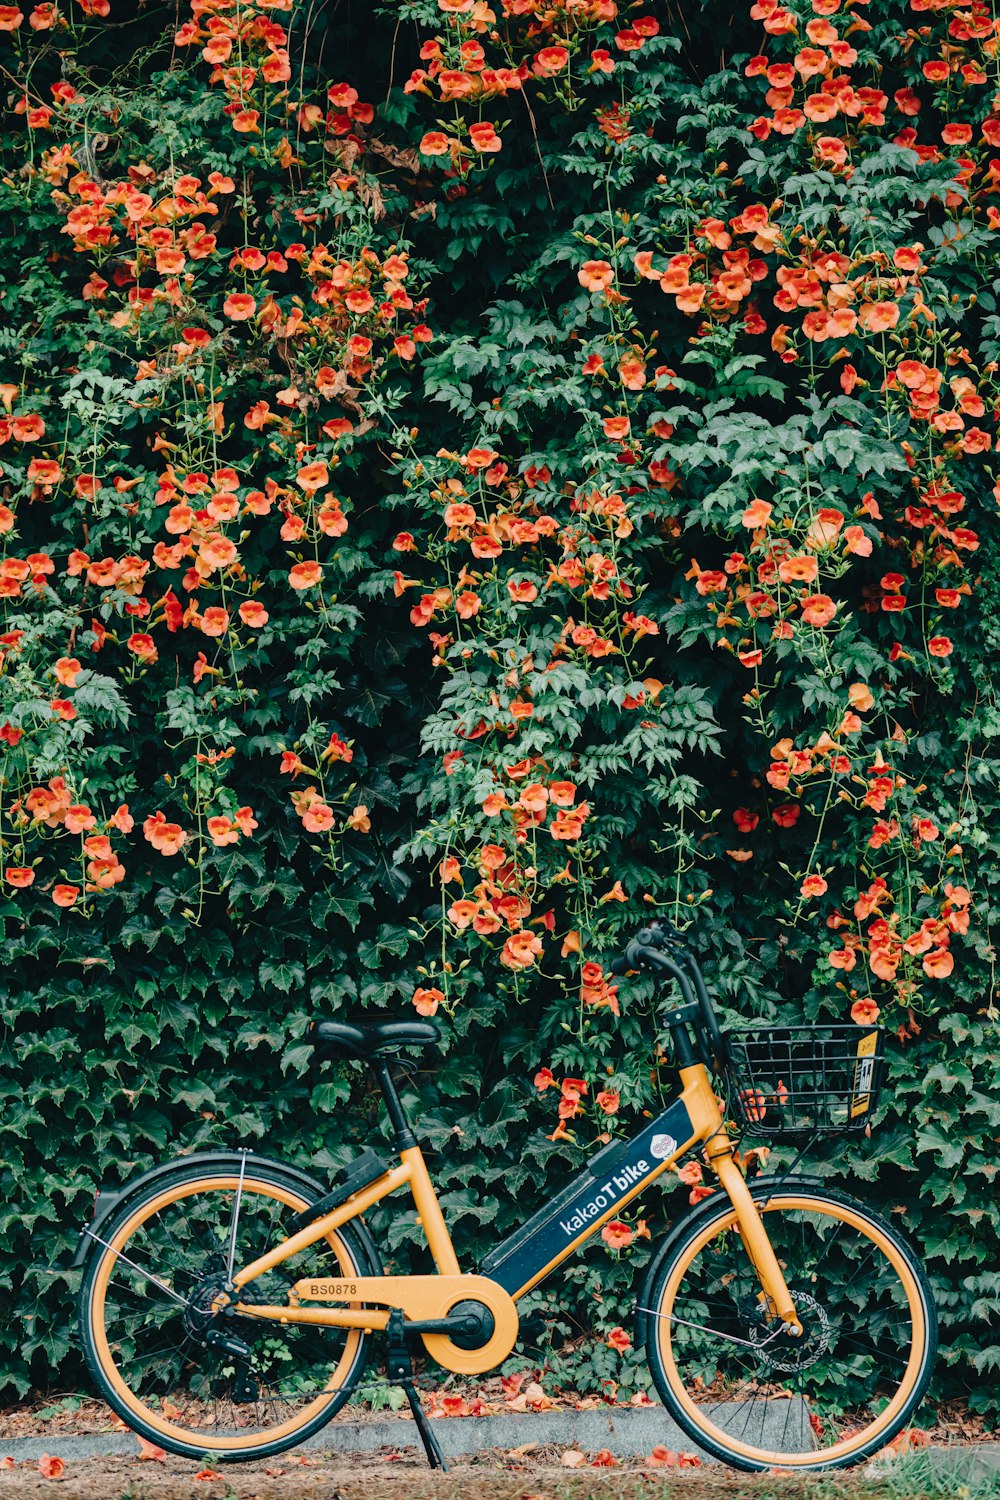 yellow bicycle with red and green leaves